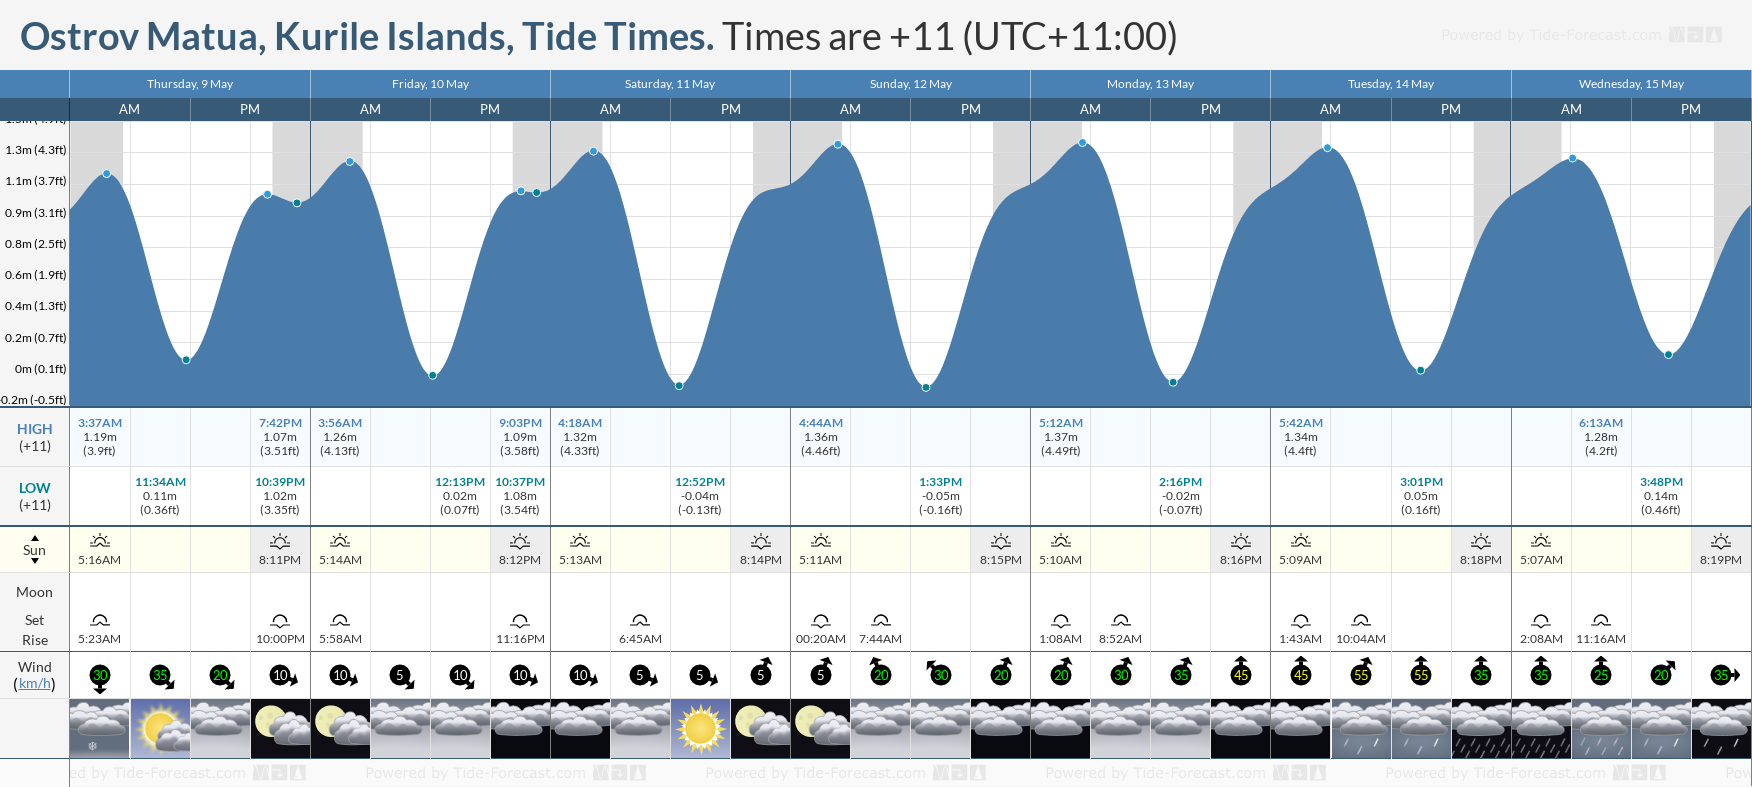 Ostrov Matua, Kurile Islands Tide Chart including high and low tide tide times for the next 7 days